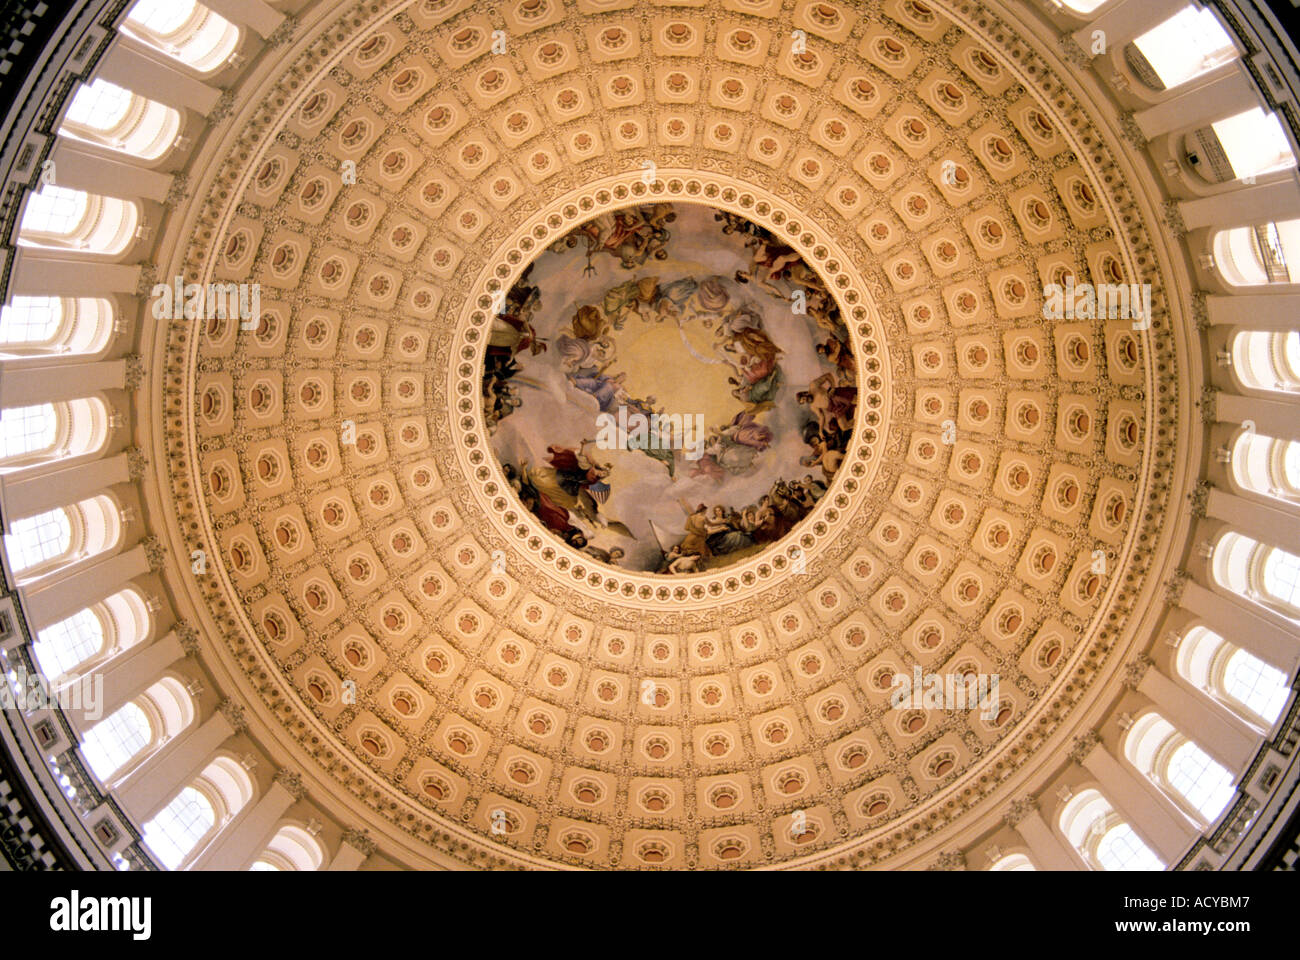 Interior Of The Dome Of The United States Capitol Building